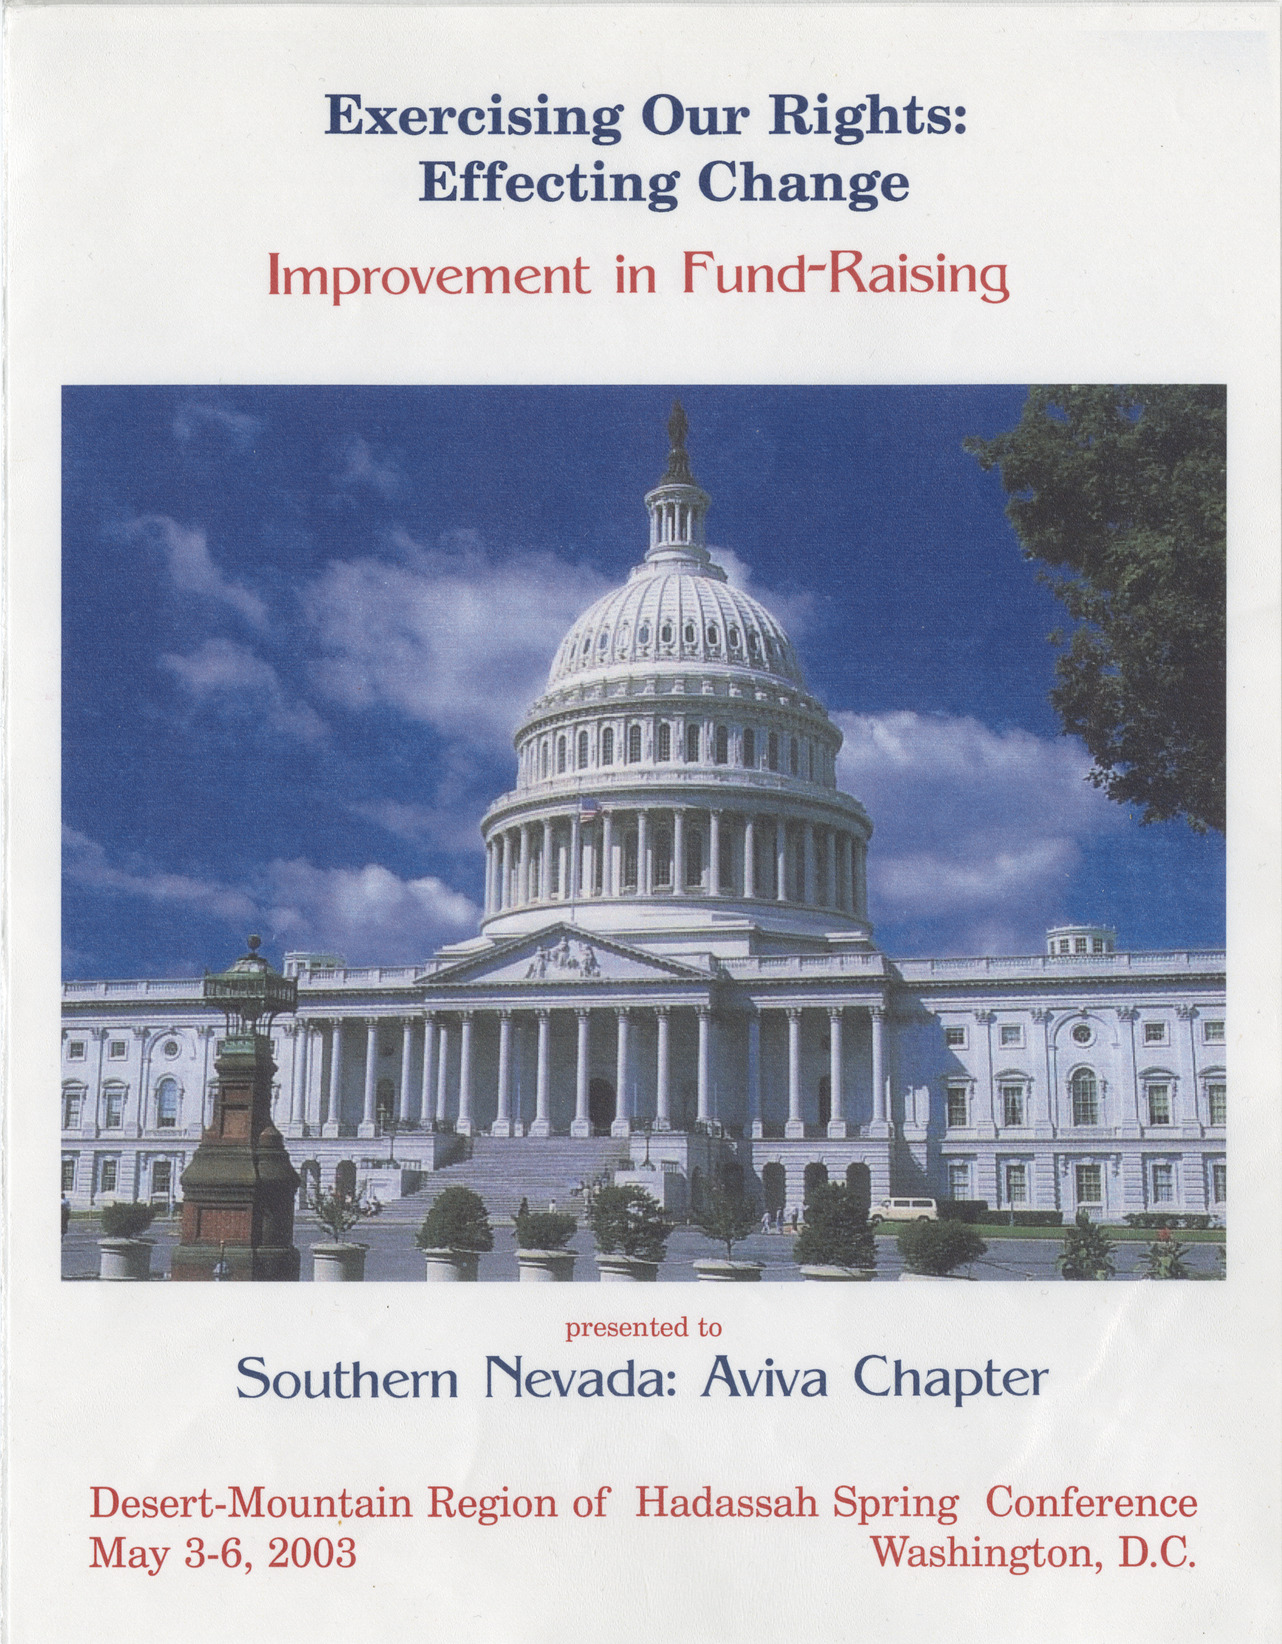 Improvement in Fund-Raising award for Southern Nevada Aviva Chapter, May 2003